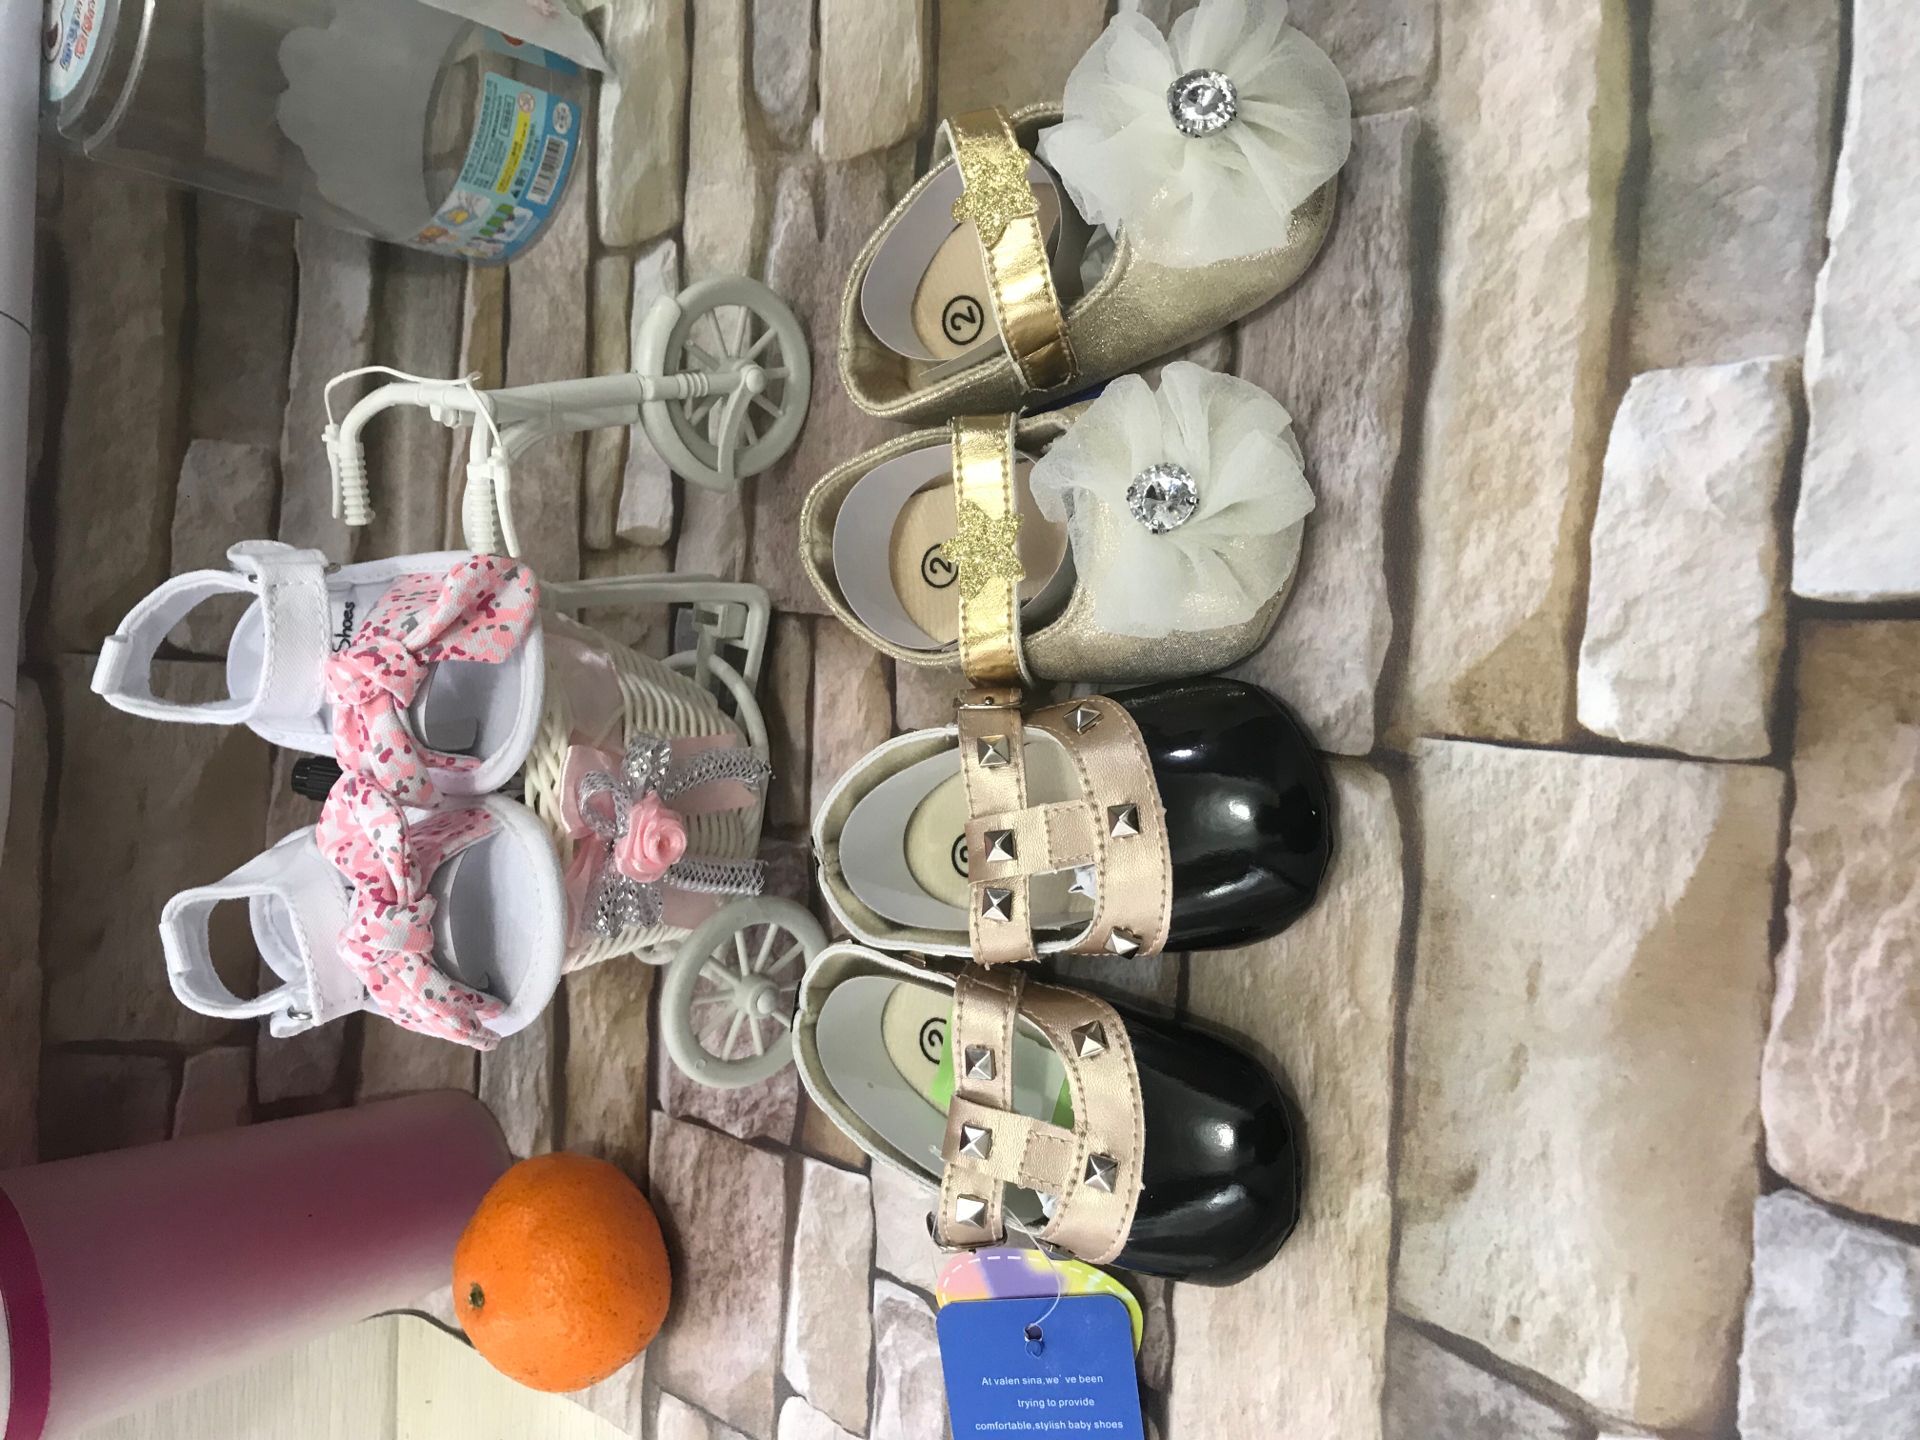 valen sina baby shoes